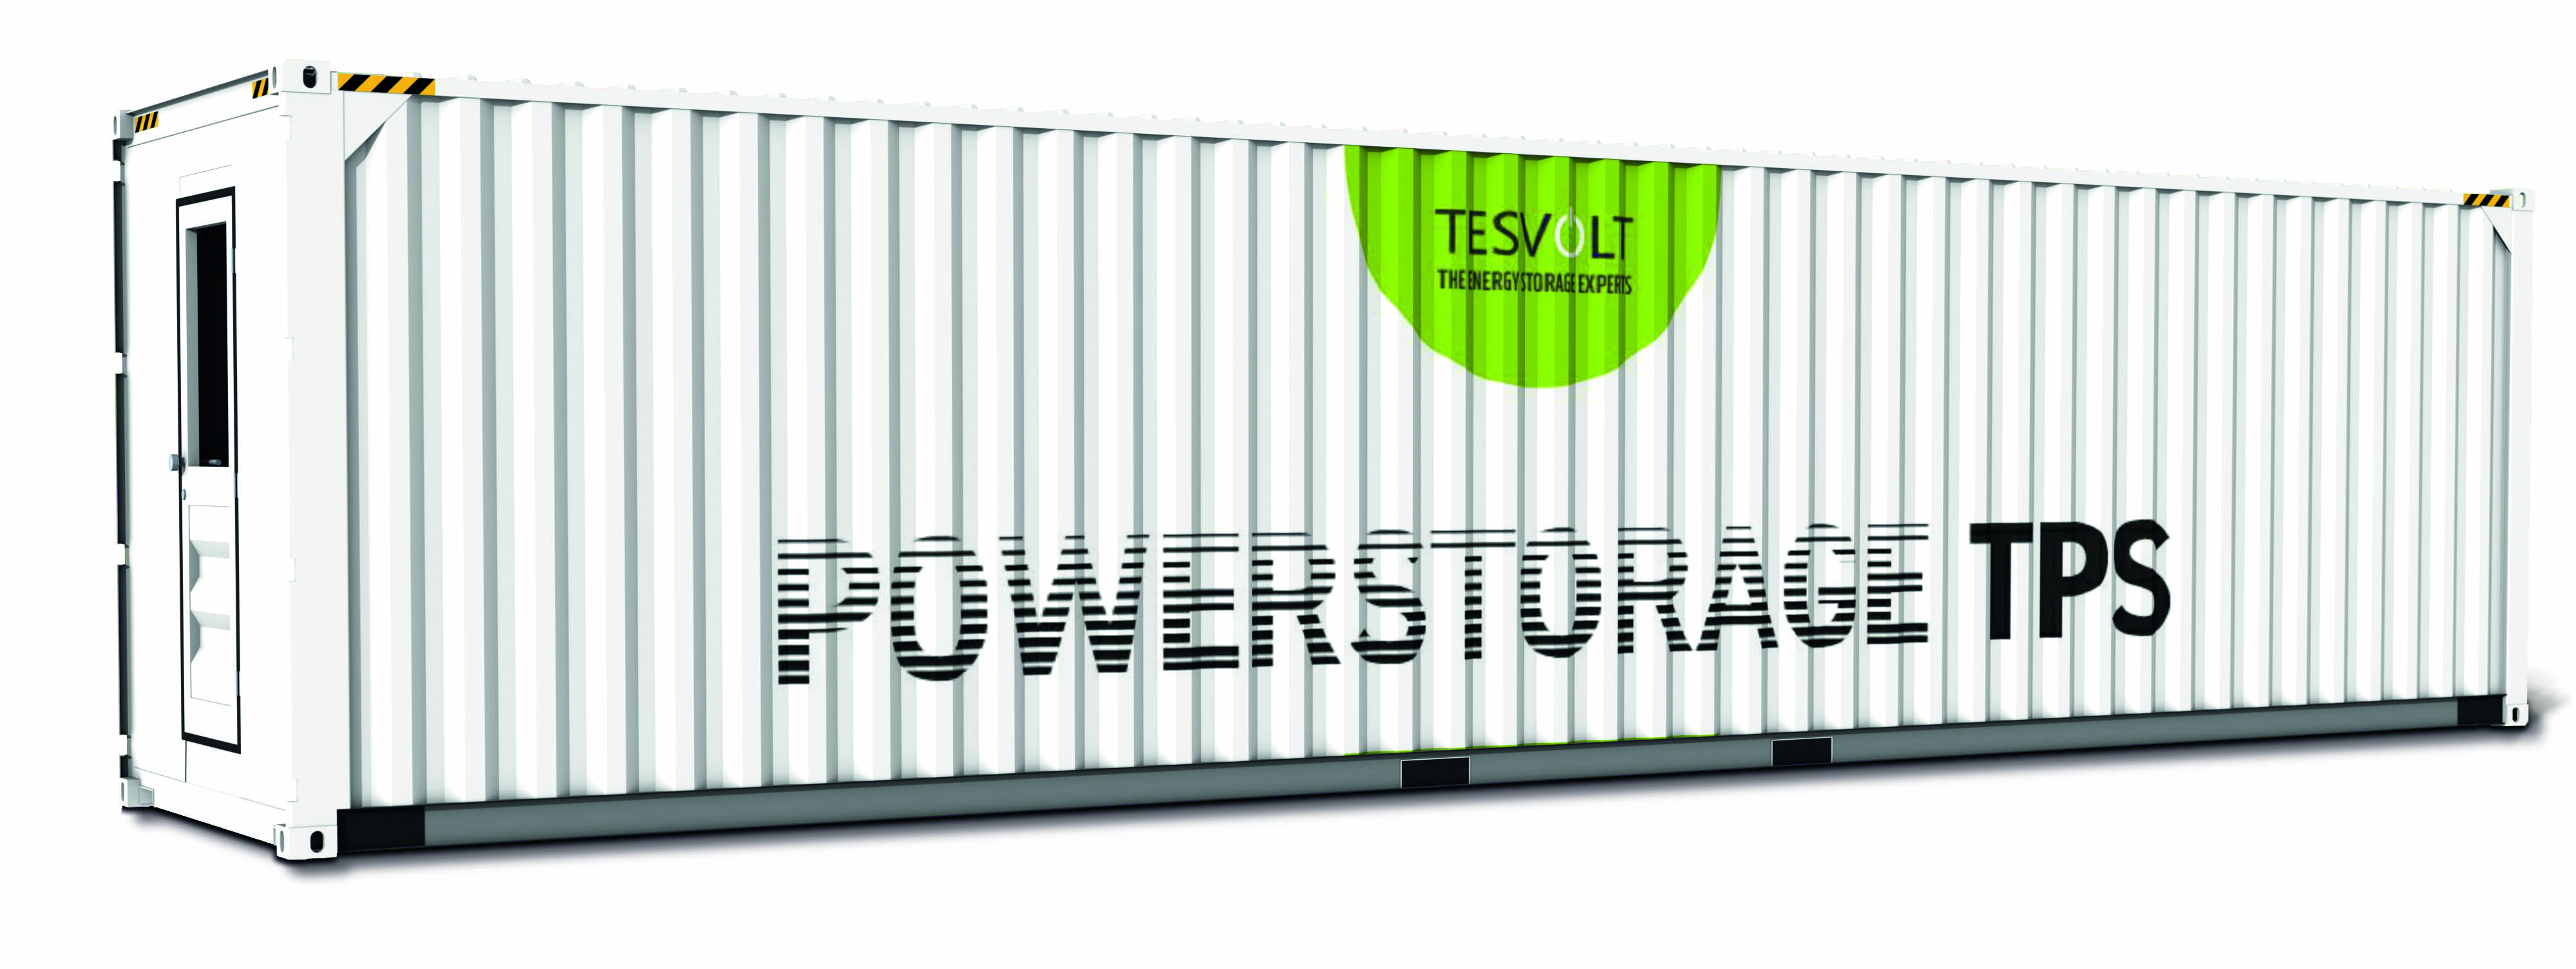 System containers. Battery Storage Container. Battery Storage inside the Containers. Containers Battery Storage Wallpaper. The Size of the Container of Energy Drinks.